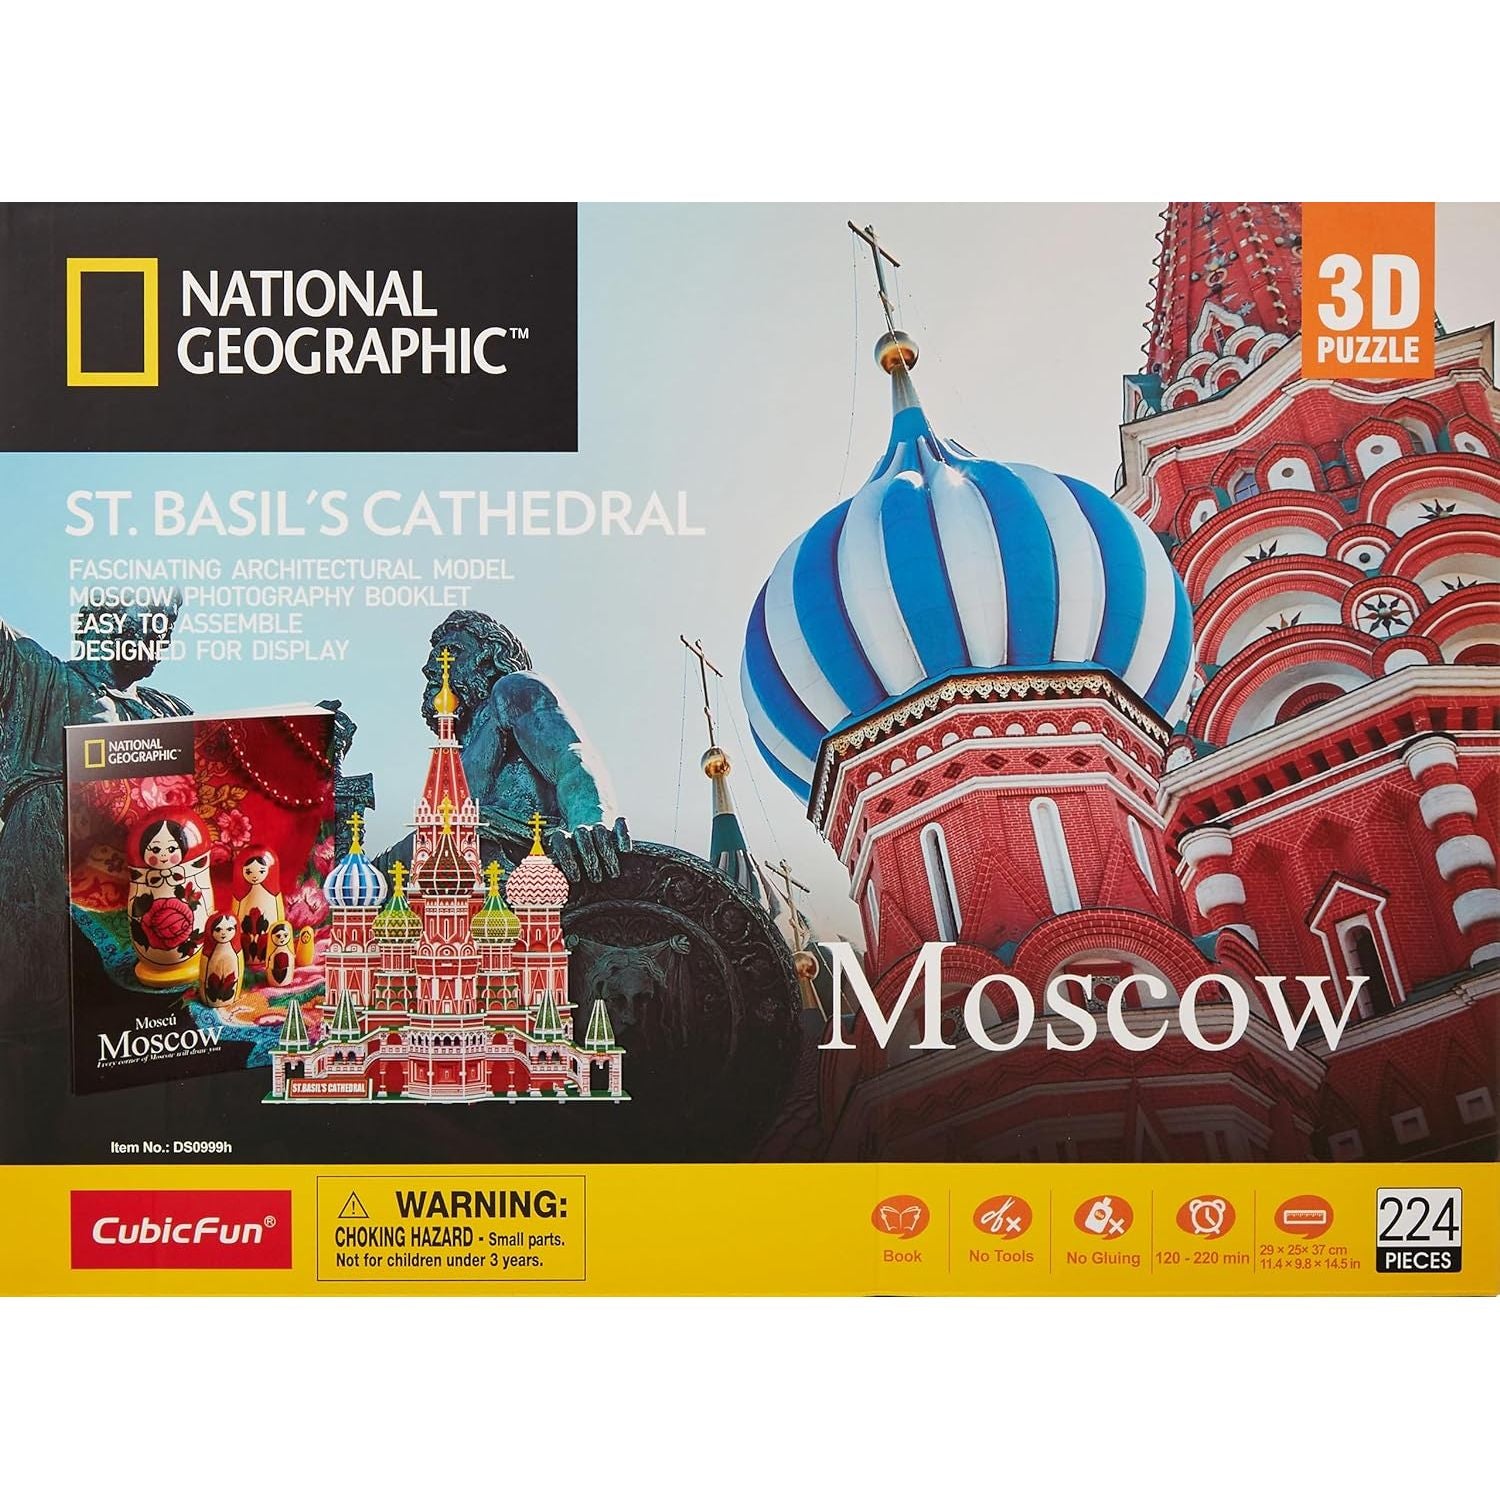 CubicFun 3D Puzzles Moscow St. Basil's Cathedral 224 Pieces with Booklet